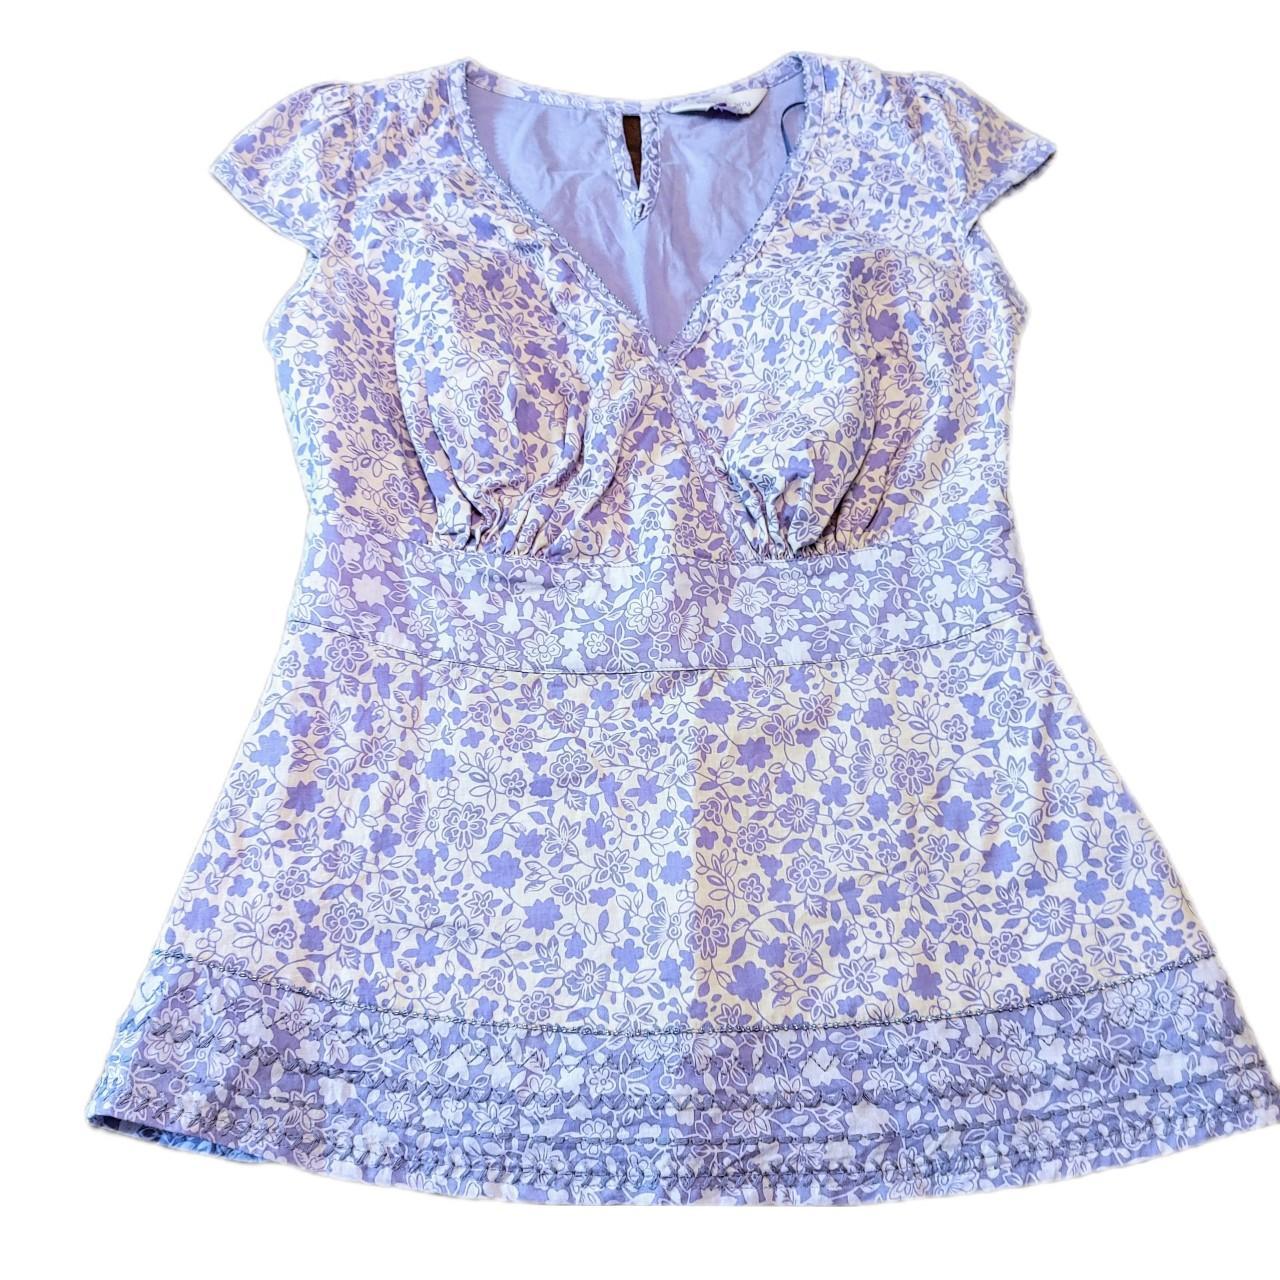 Product Image 1 - Retro floral pattern periwinkle blue